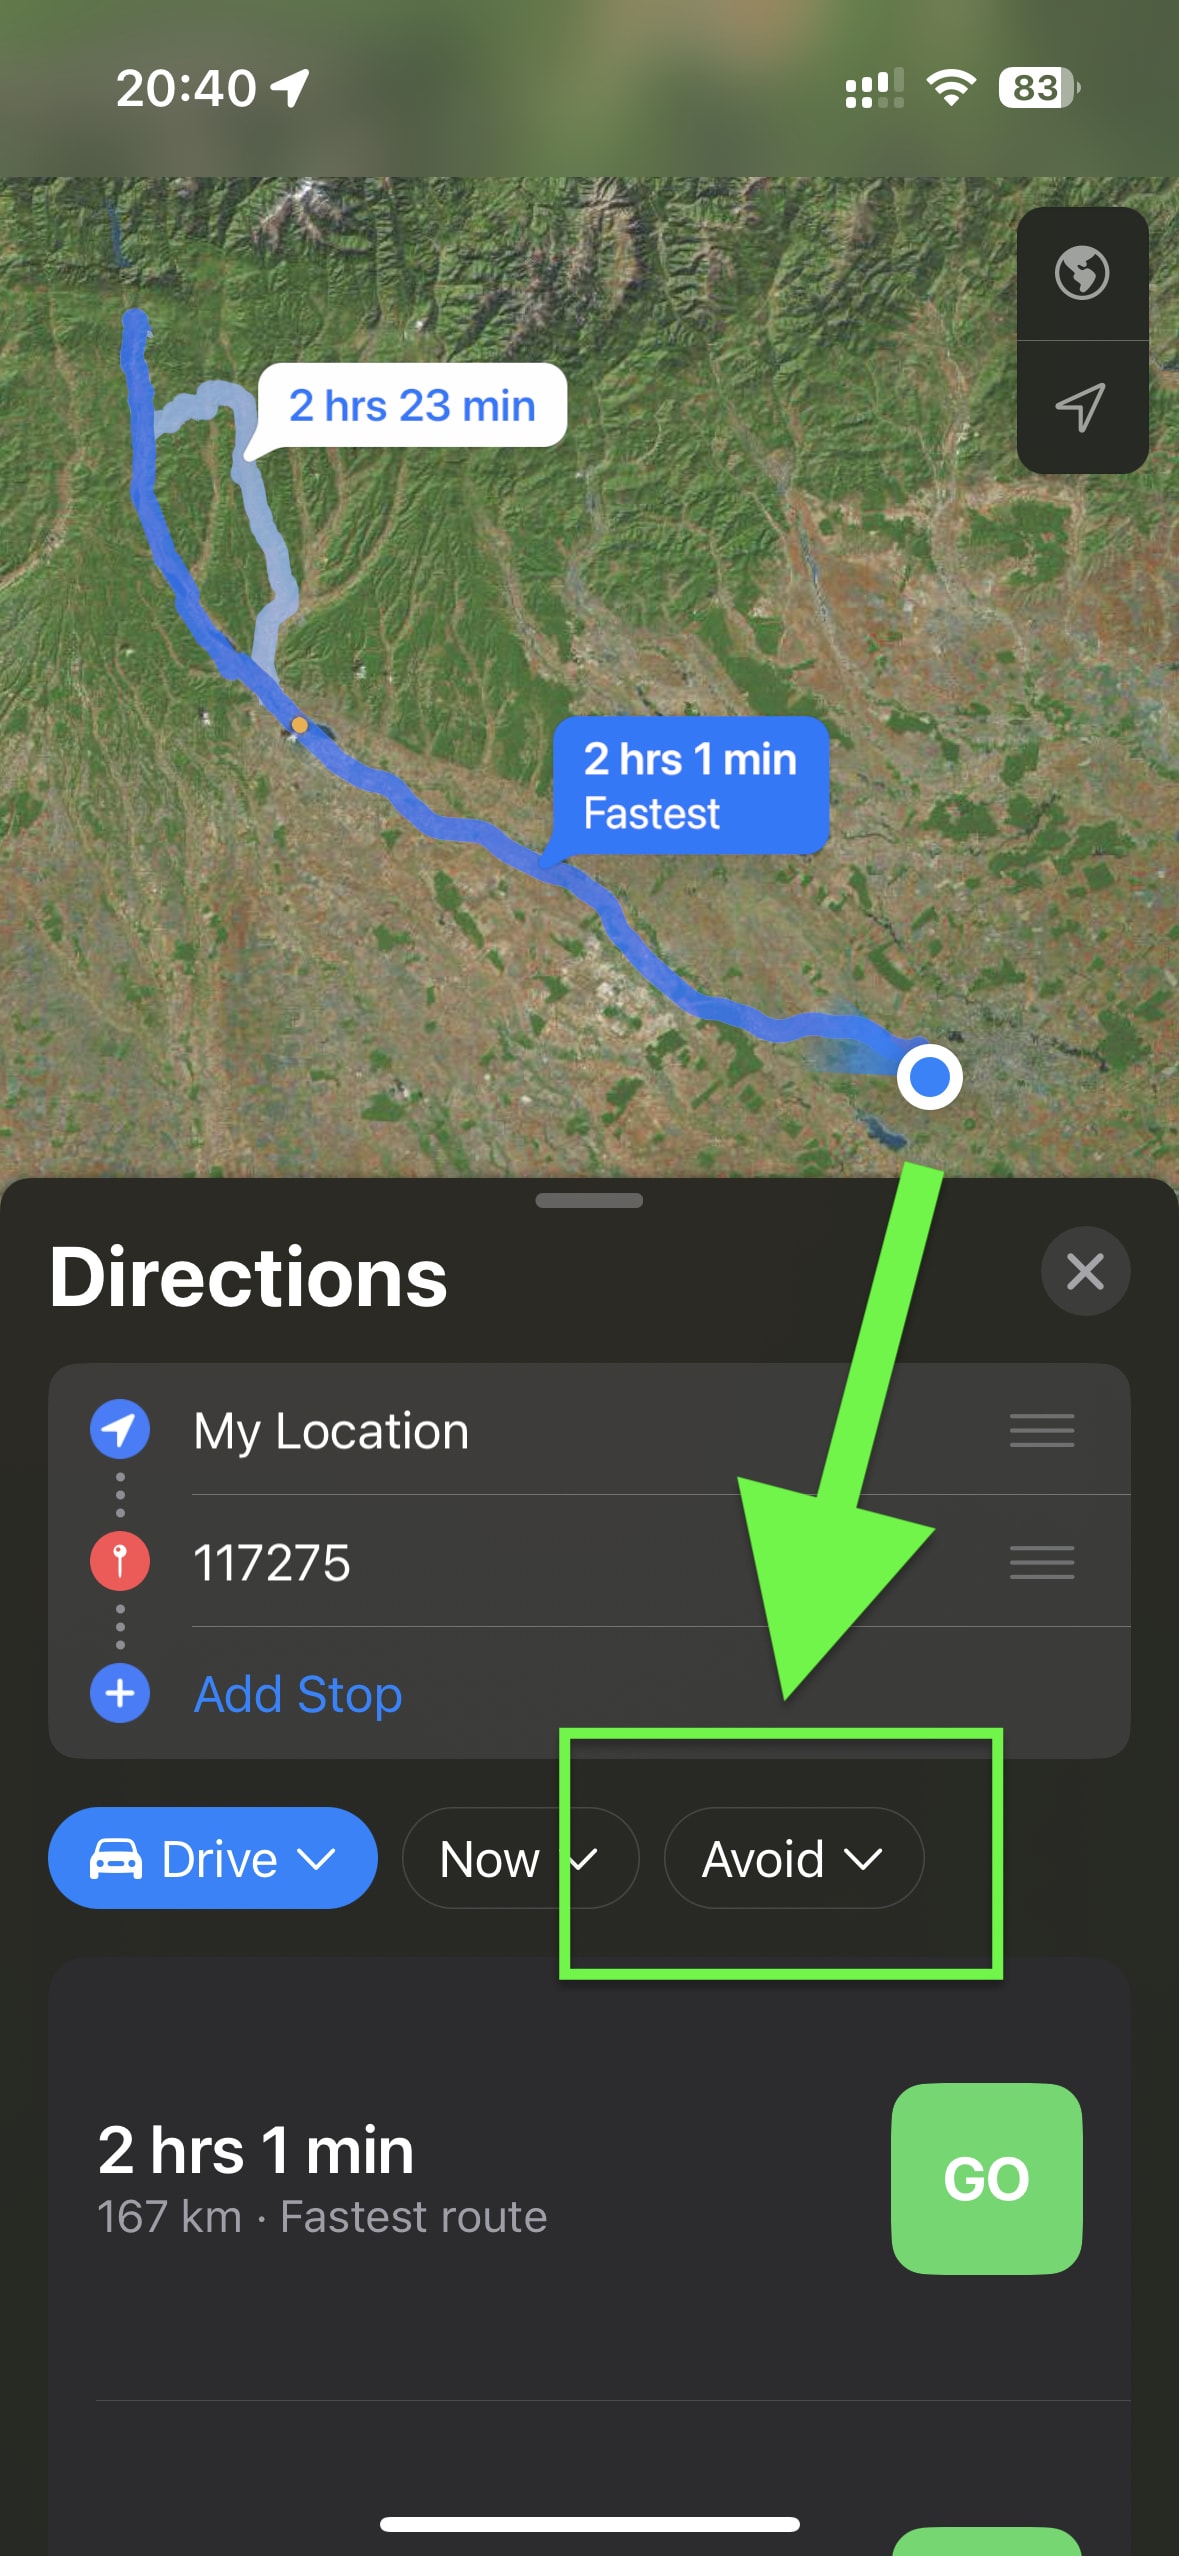 https://s1.cdn.autoevolution.com/images/news/how-to-avoid-toll-roads-in-apple-maps-212380_1.jpeg